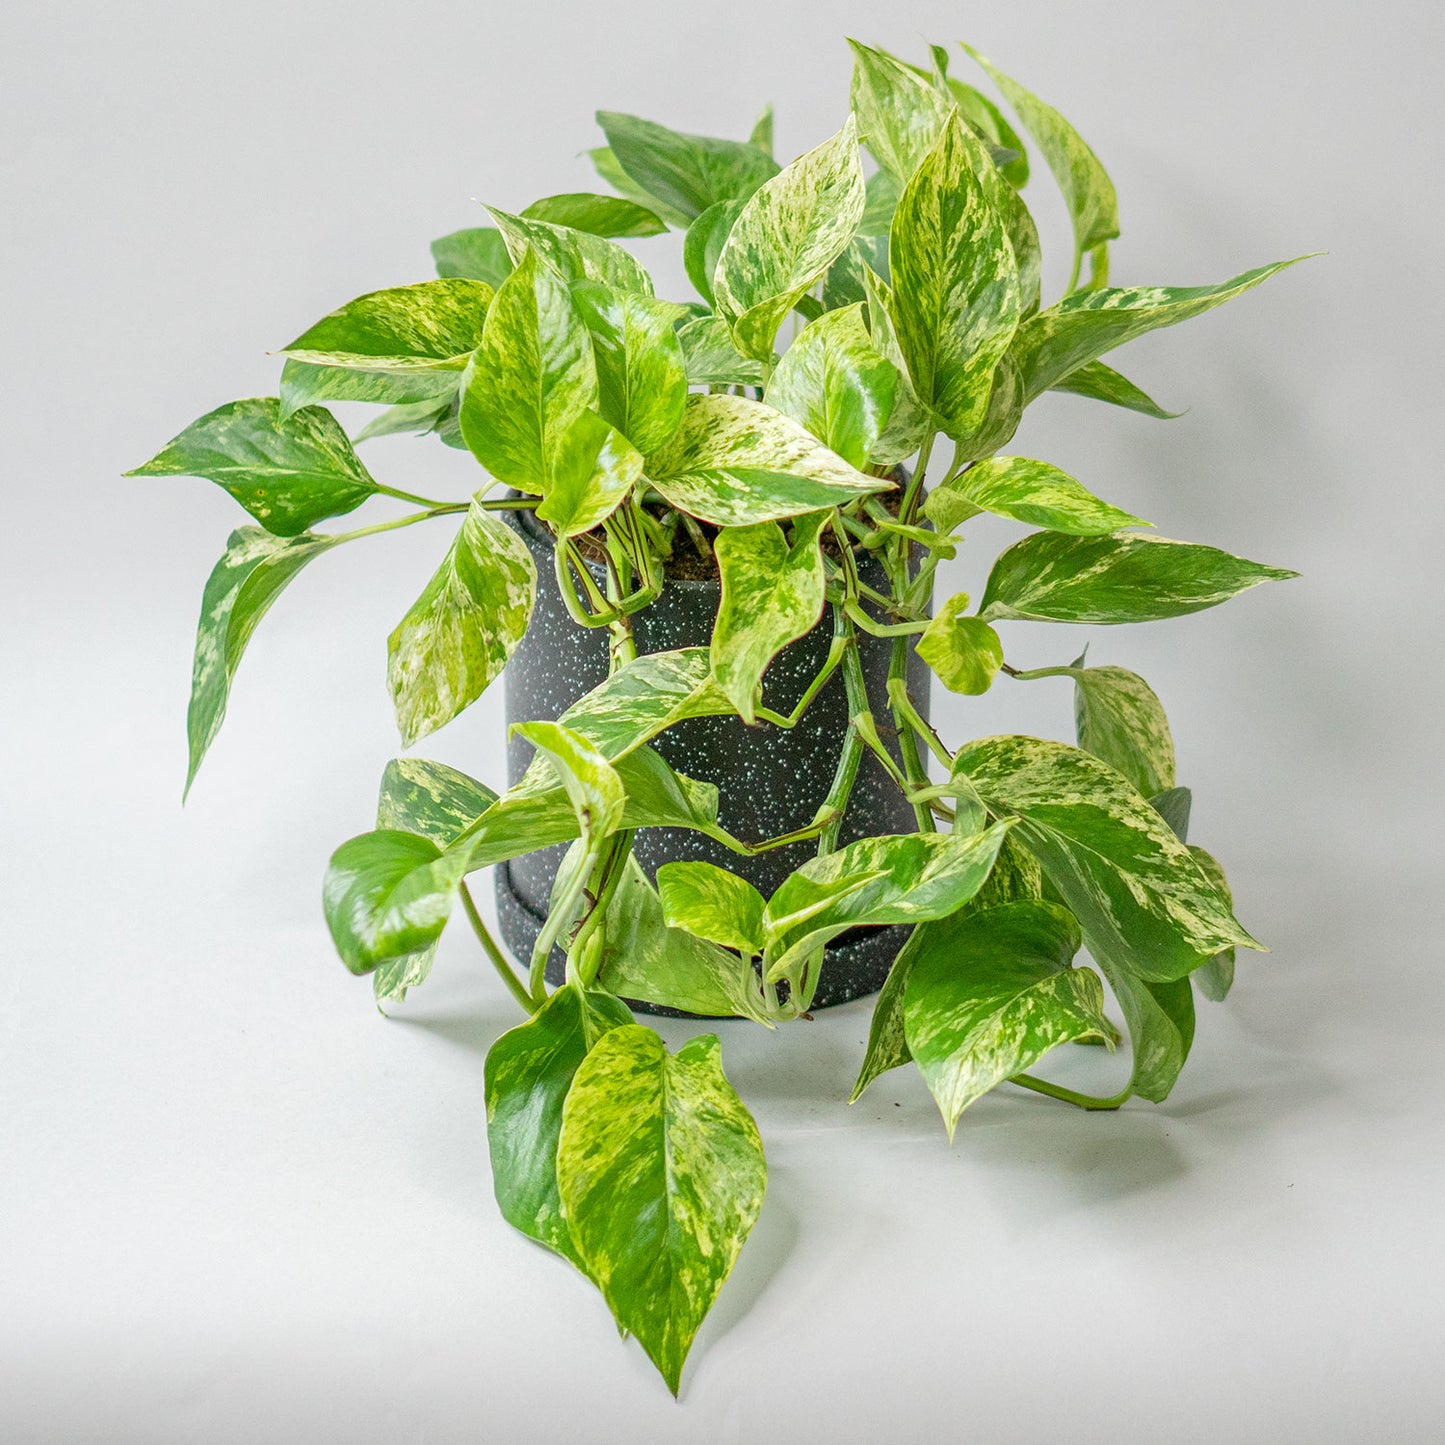 Potted Pothos Marble Queen - Best Quality Easy-Care Trailing Houseplant Pothos Marble Queen 6” - Buy repotted easy-care indoor plant Pothos White Marble for delivery at Planteia